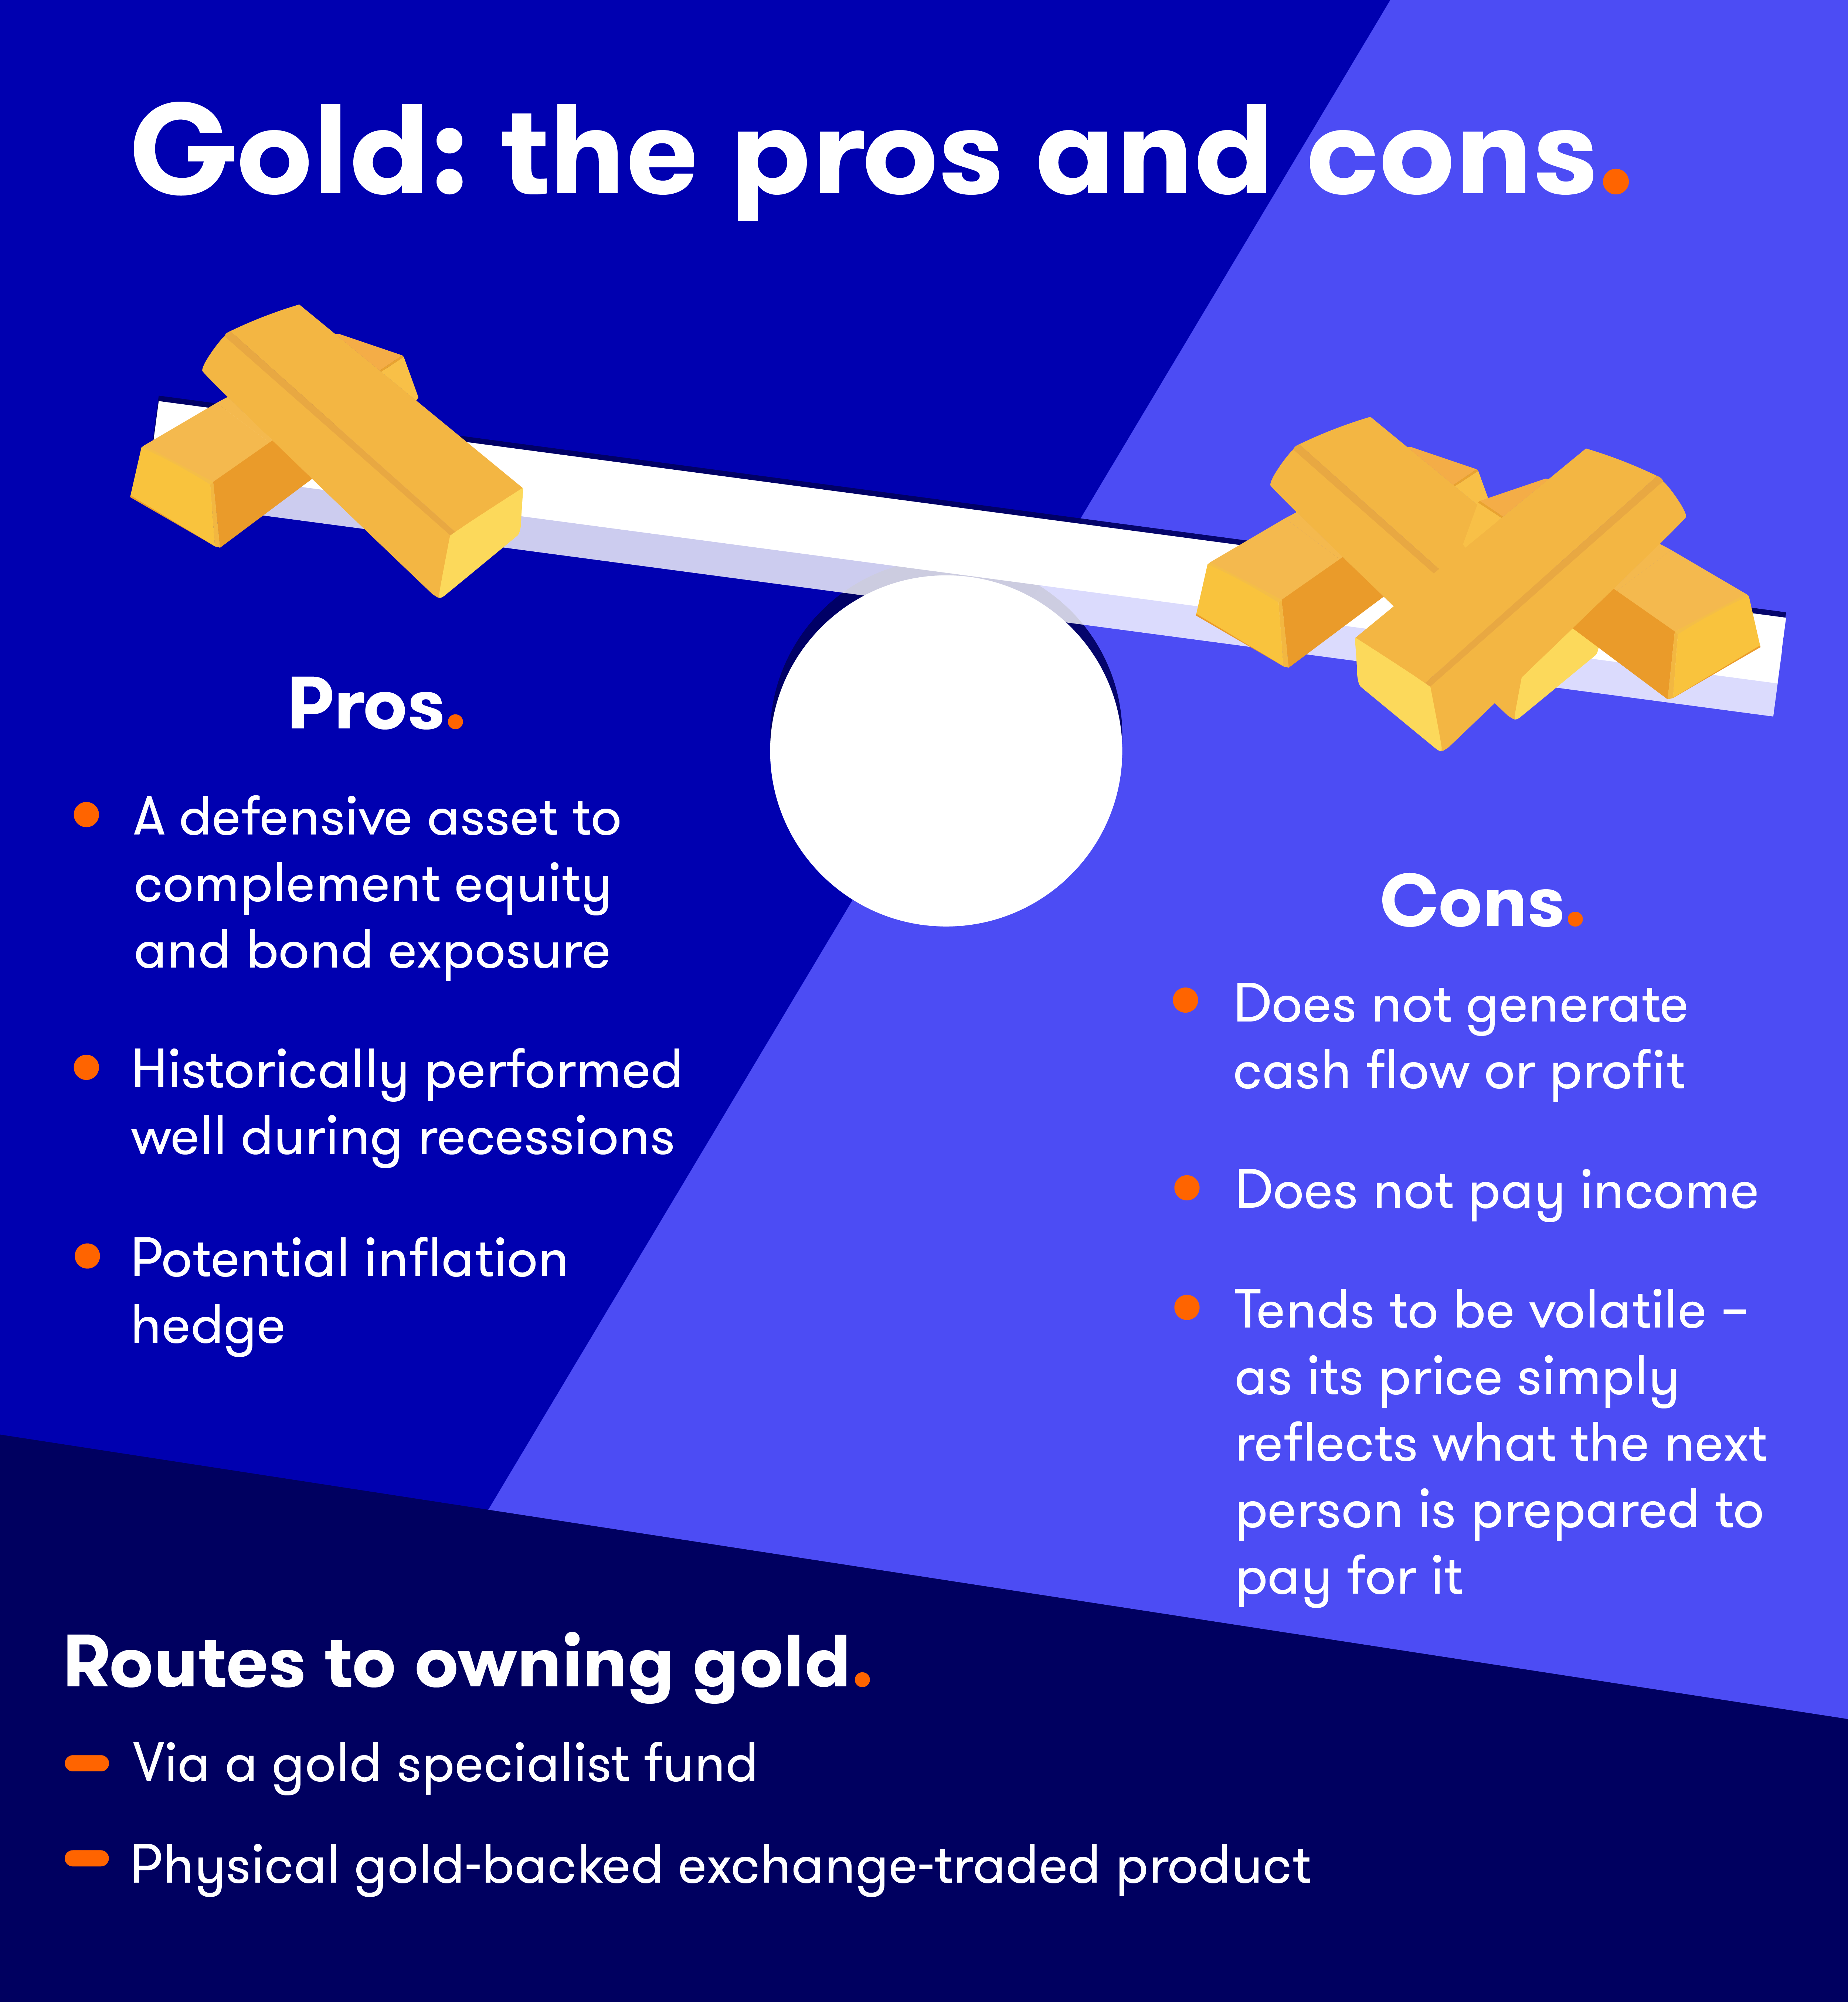 The pros and cons of gold